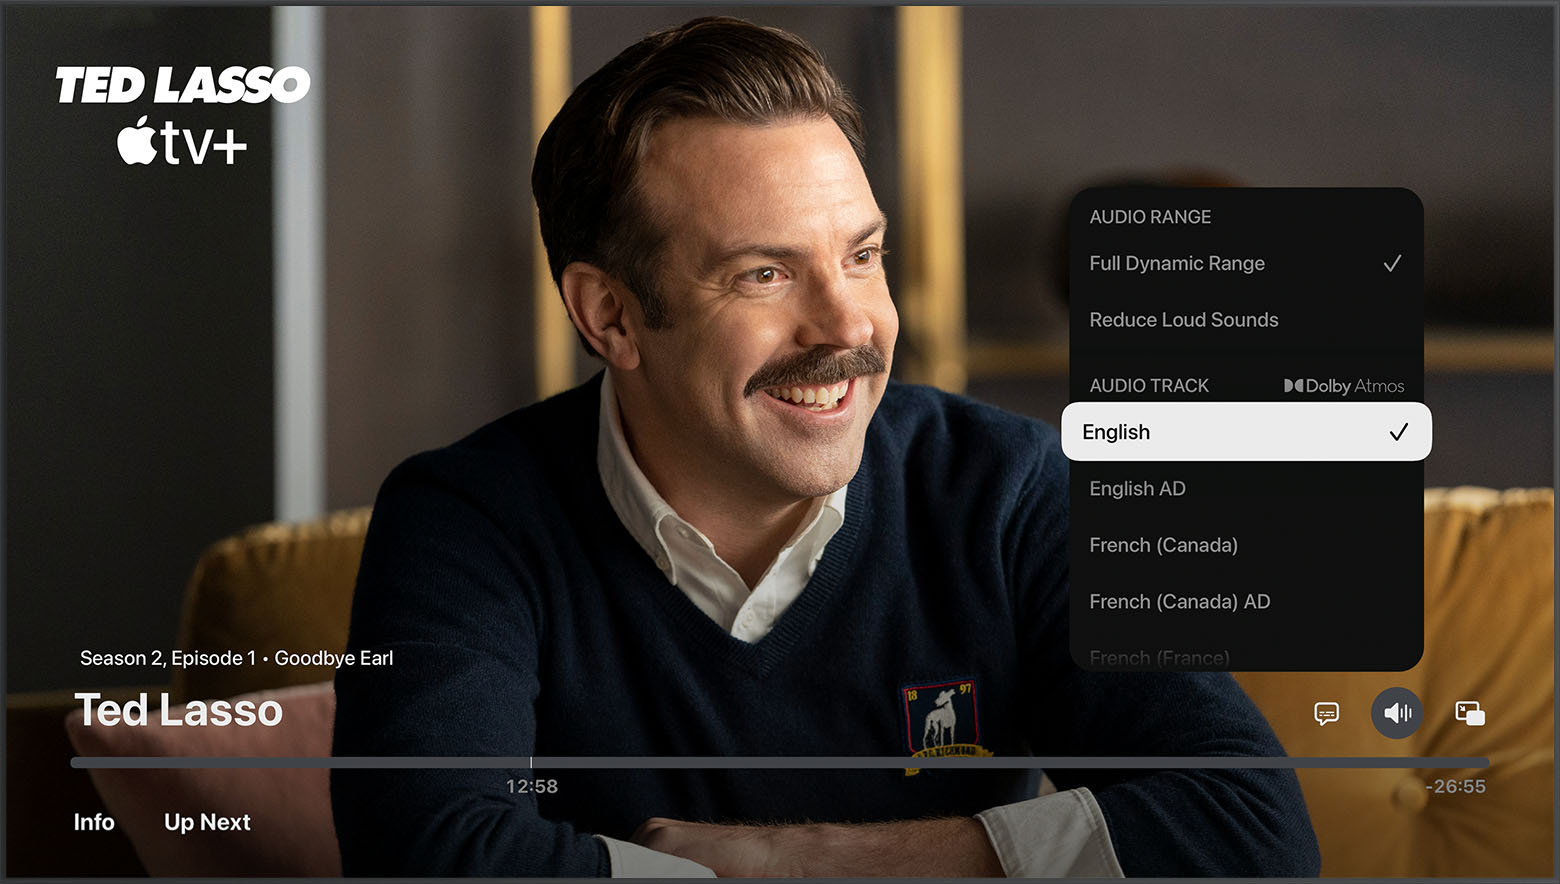 Audio Language options in the Apple TV app on Apple TV, smart TV, and streaming device